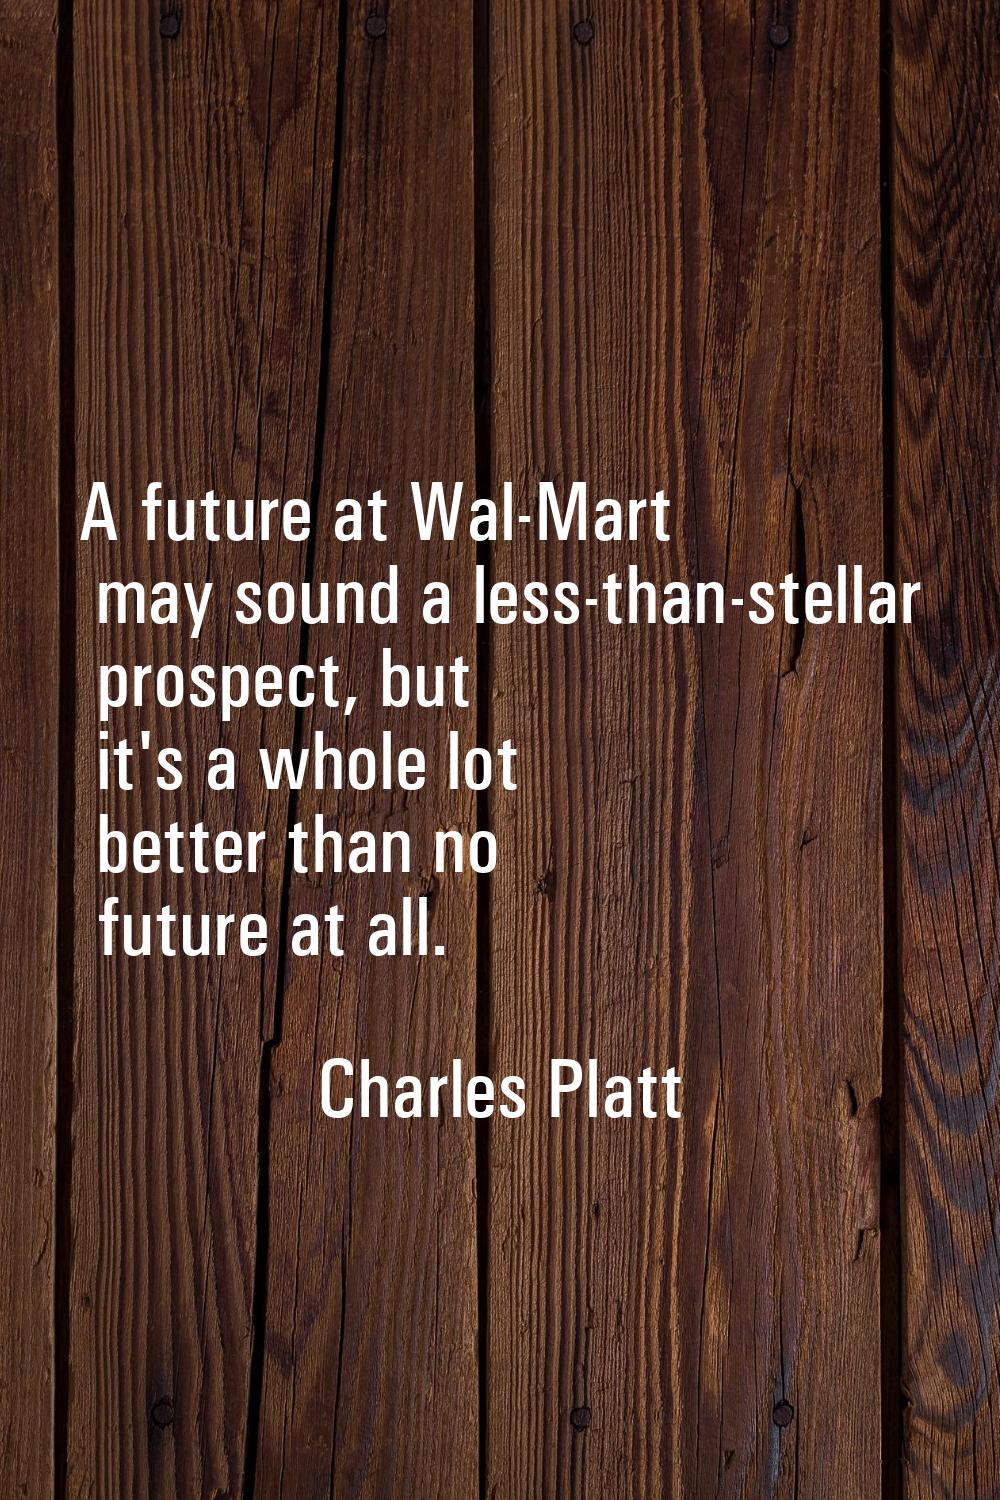 A future at Wal-Mart may sound a less-than-stellar prospect, but it's a whole lot better than no fu